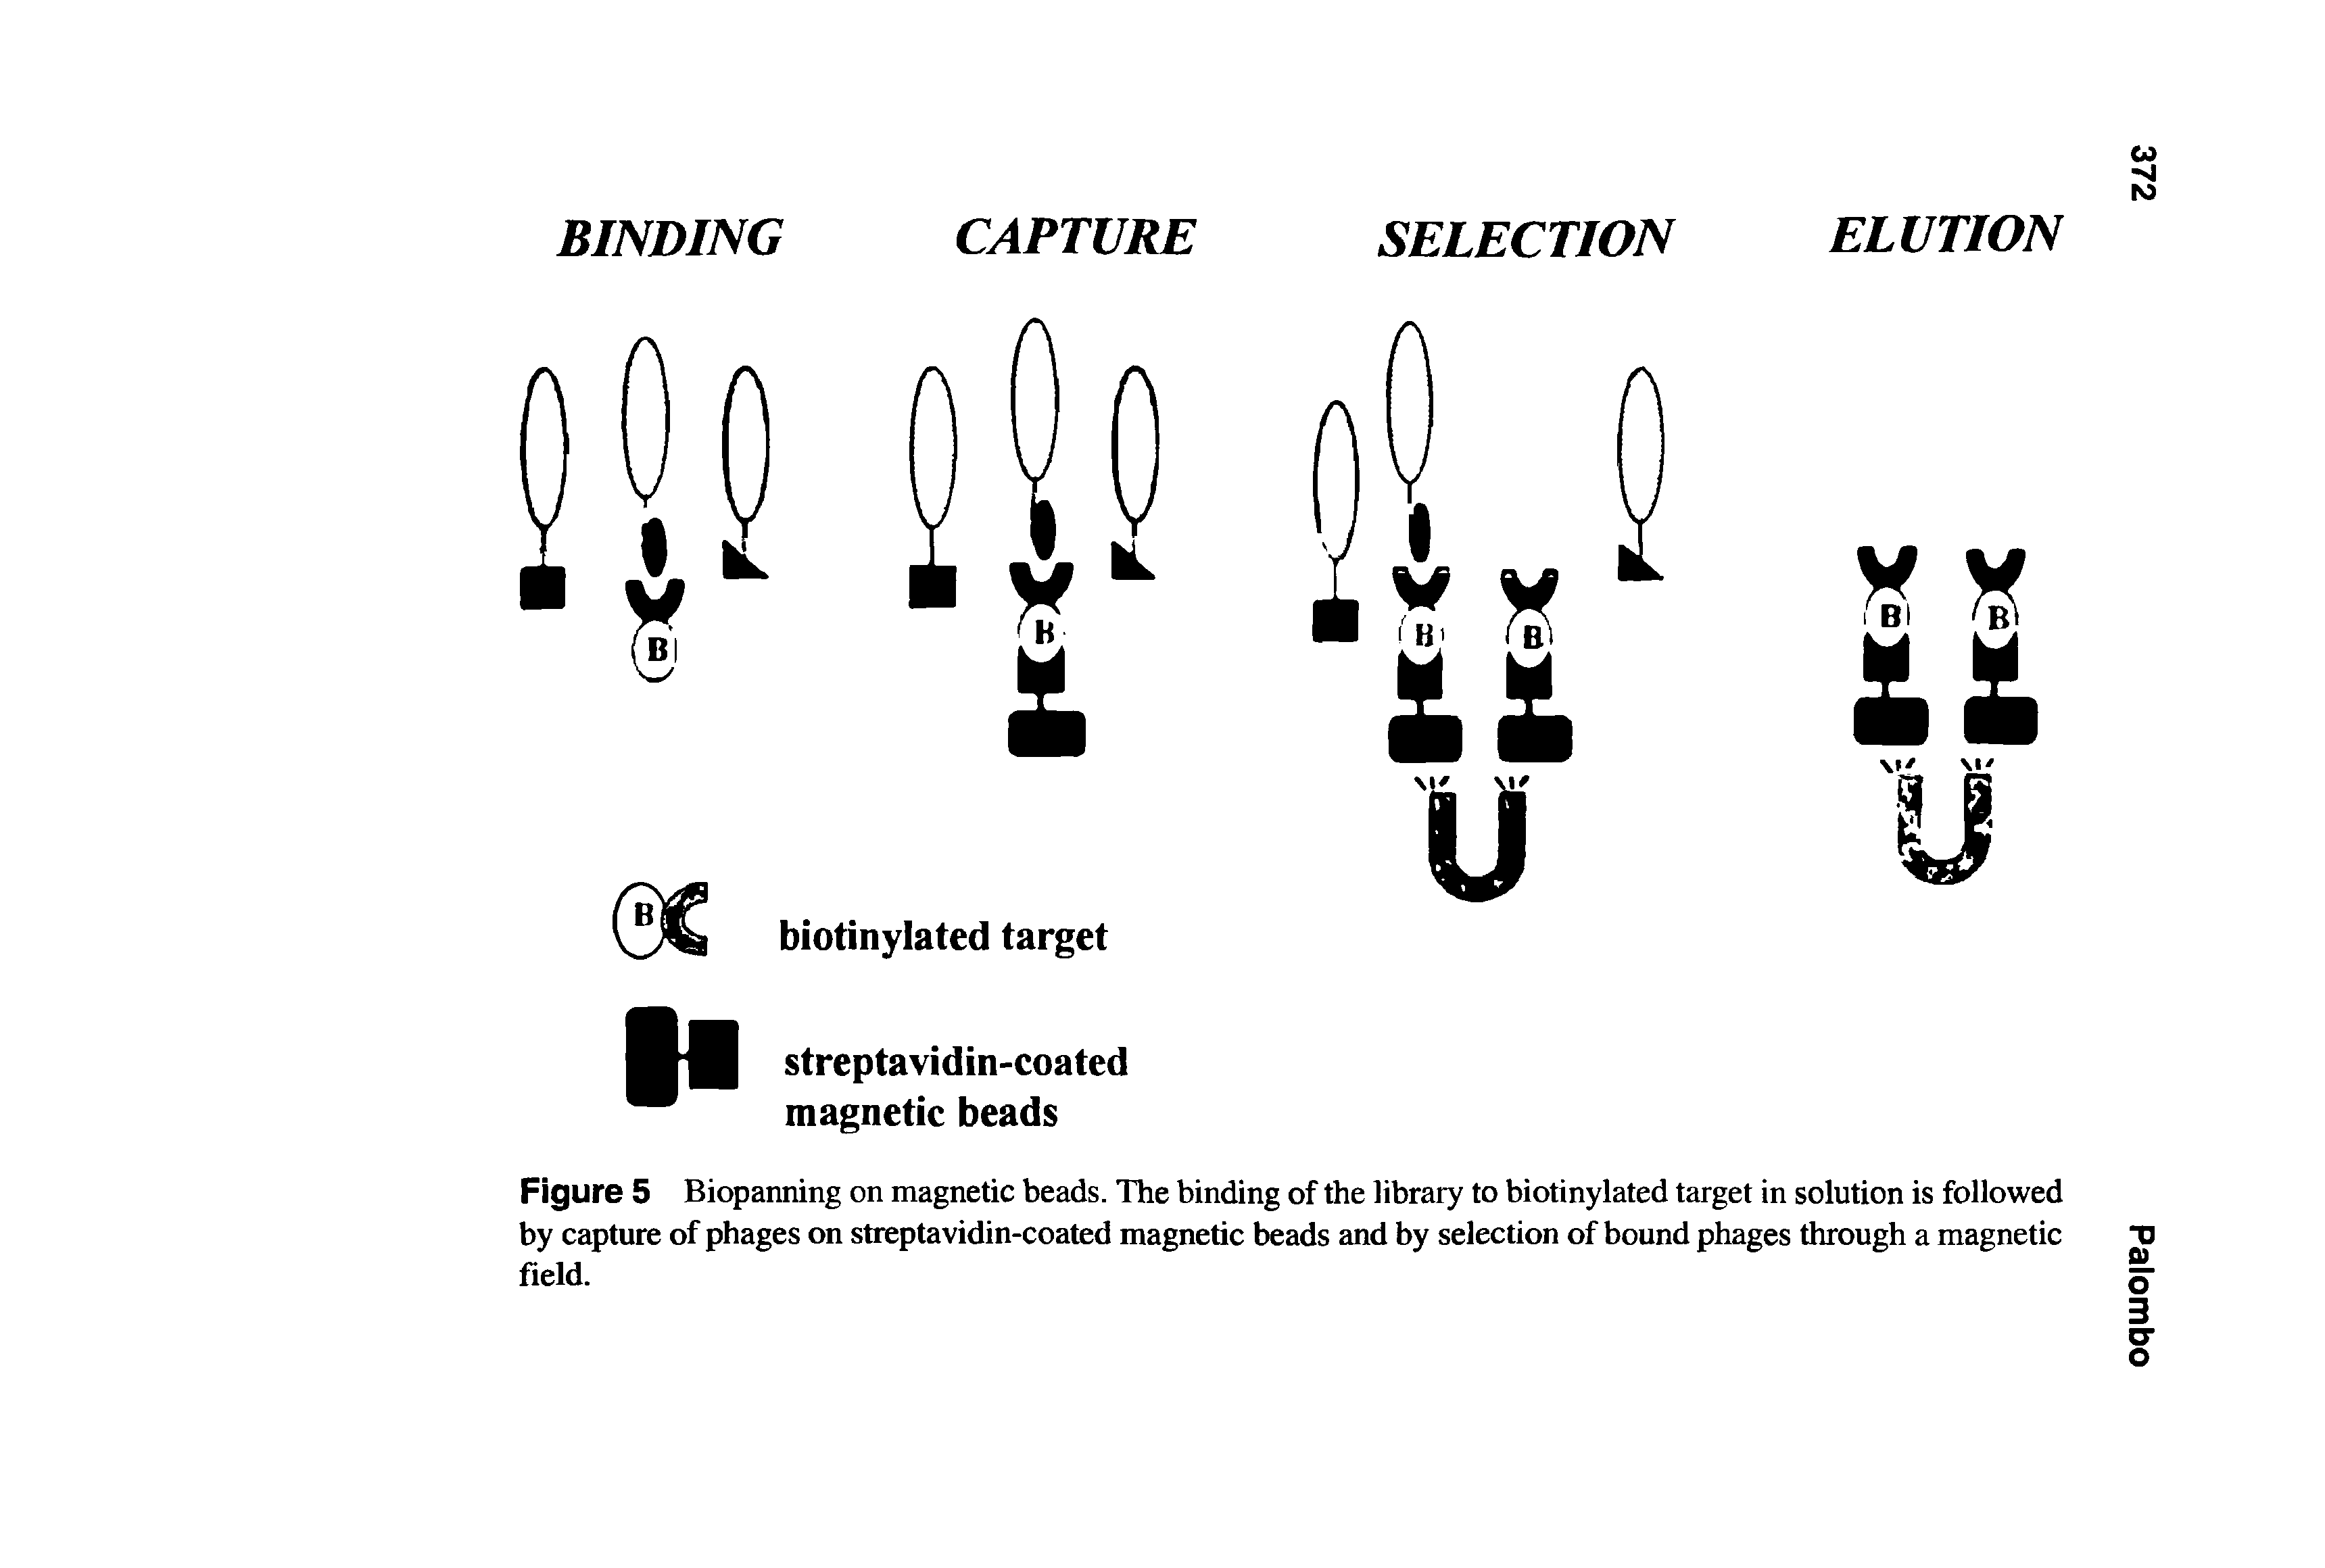 Figure 5 Biopanning on magnetic beads. The binding of the library to biotinylated target in solution is followed by capture of phages on streptavidin-coated magnetic beads and by selection of bound phages through a magnetic field.